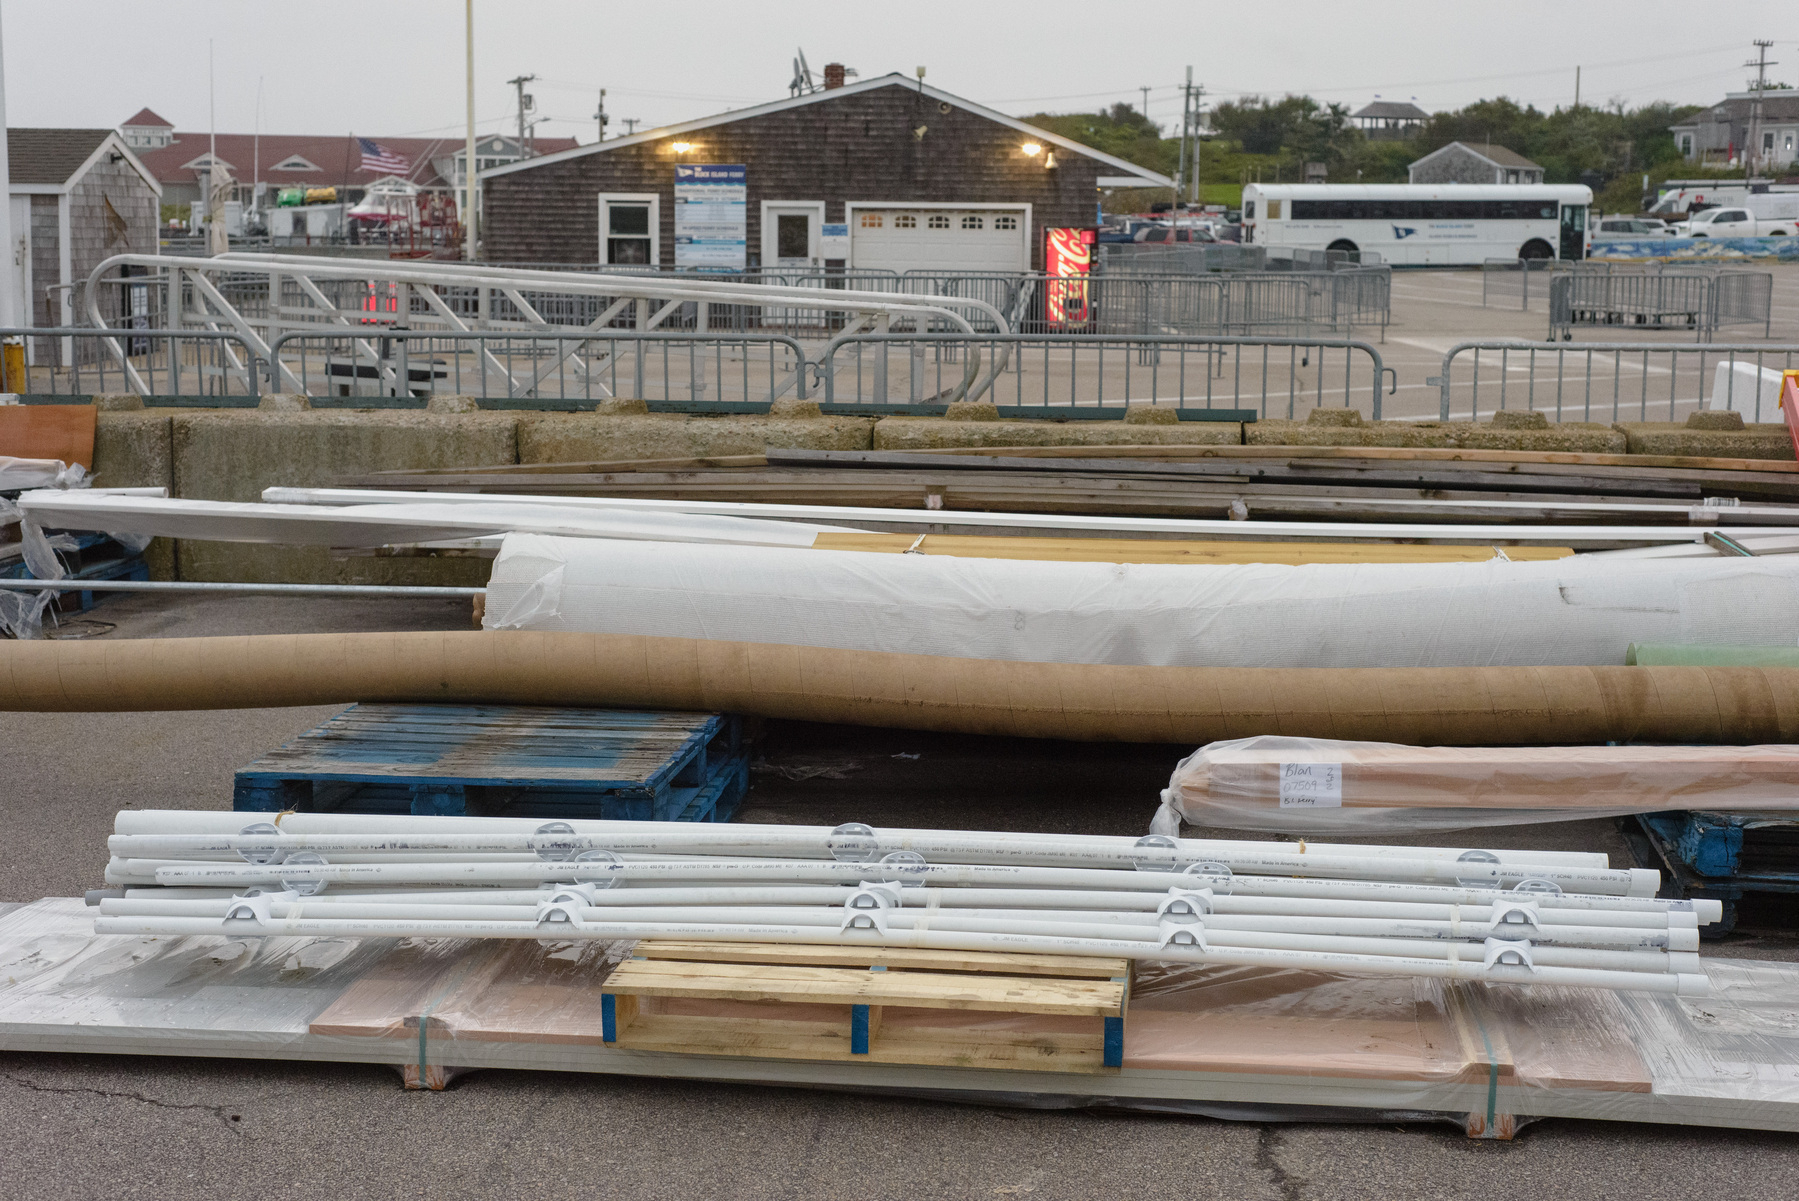 Construction materials in freight yard of ferry terminal.